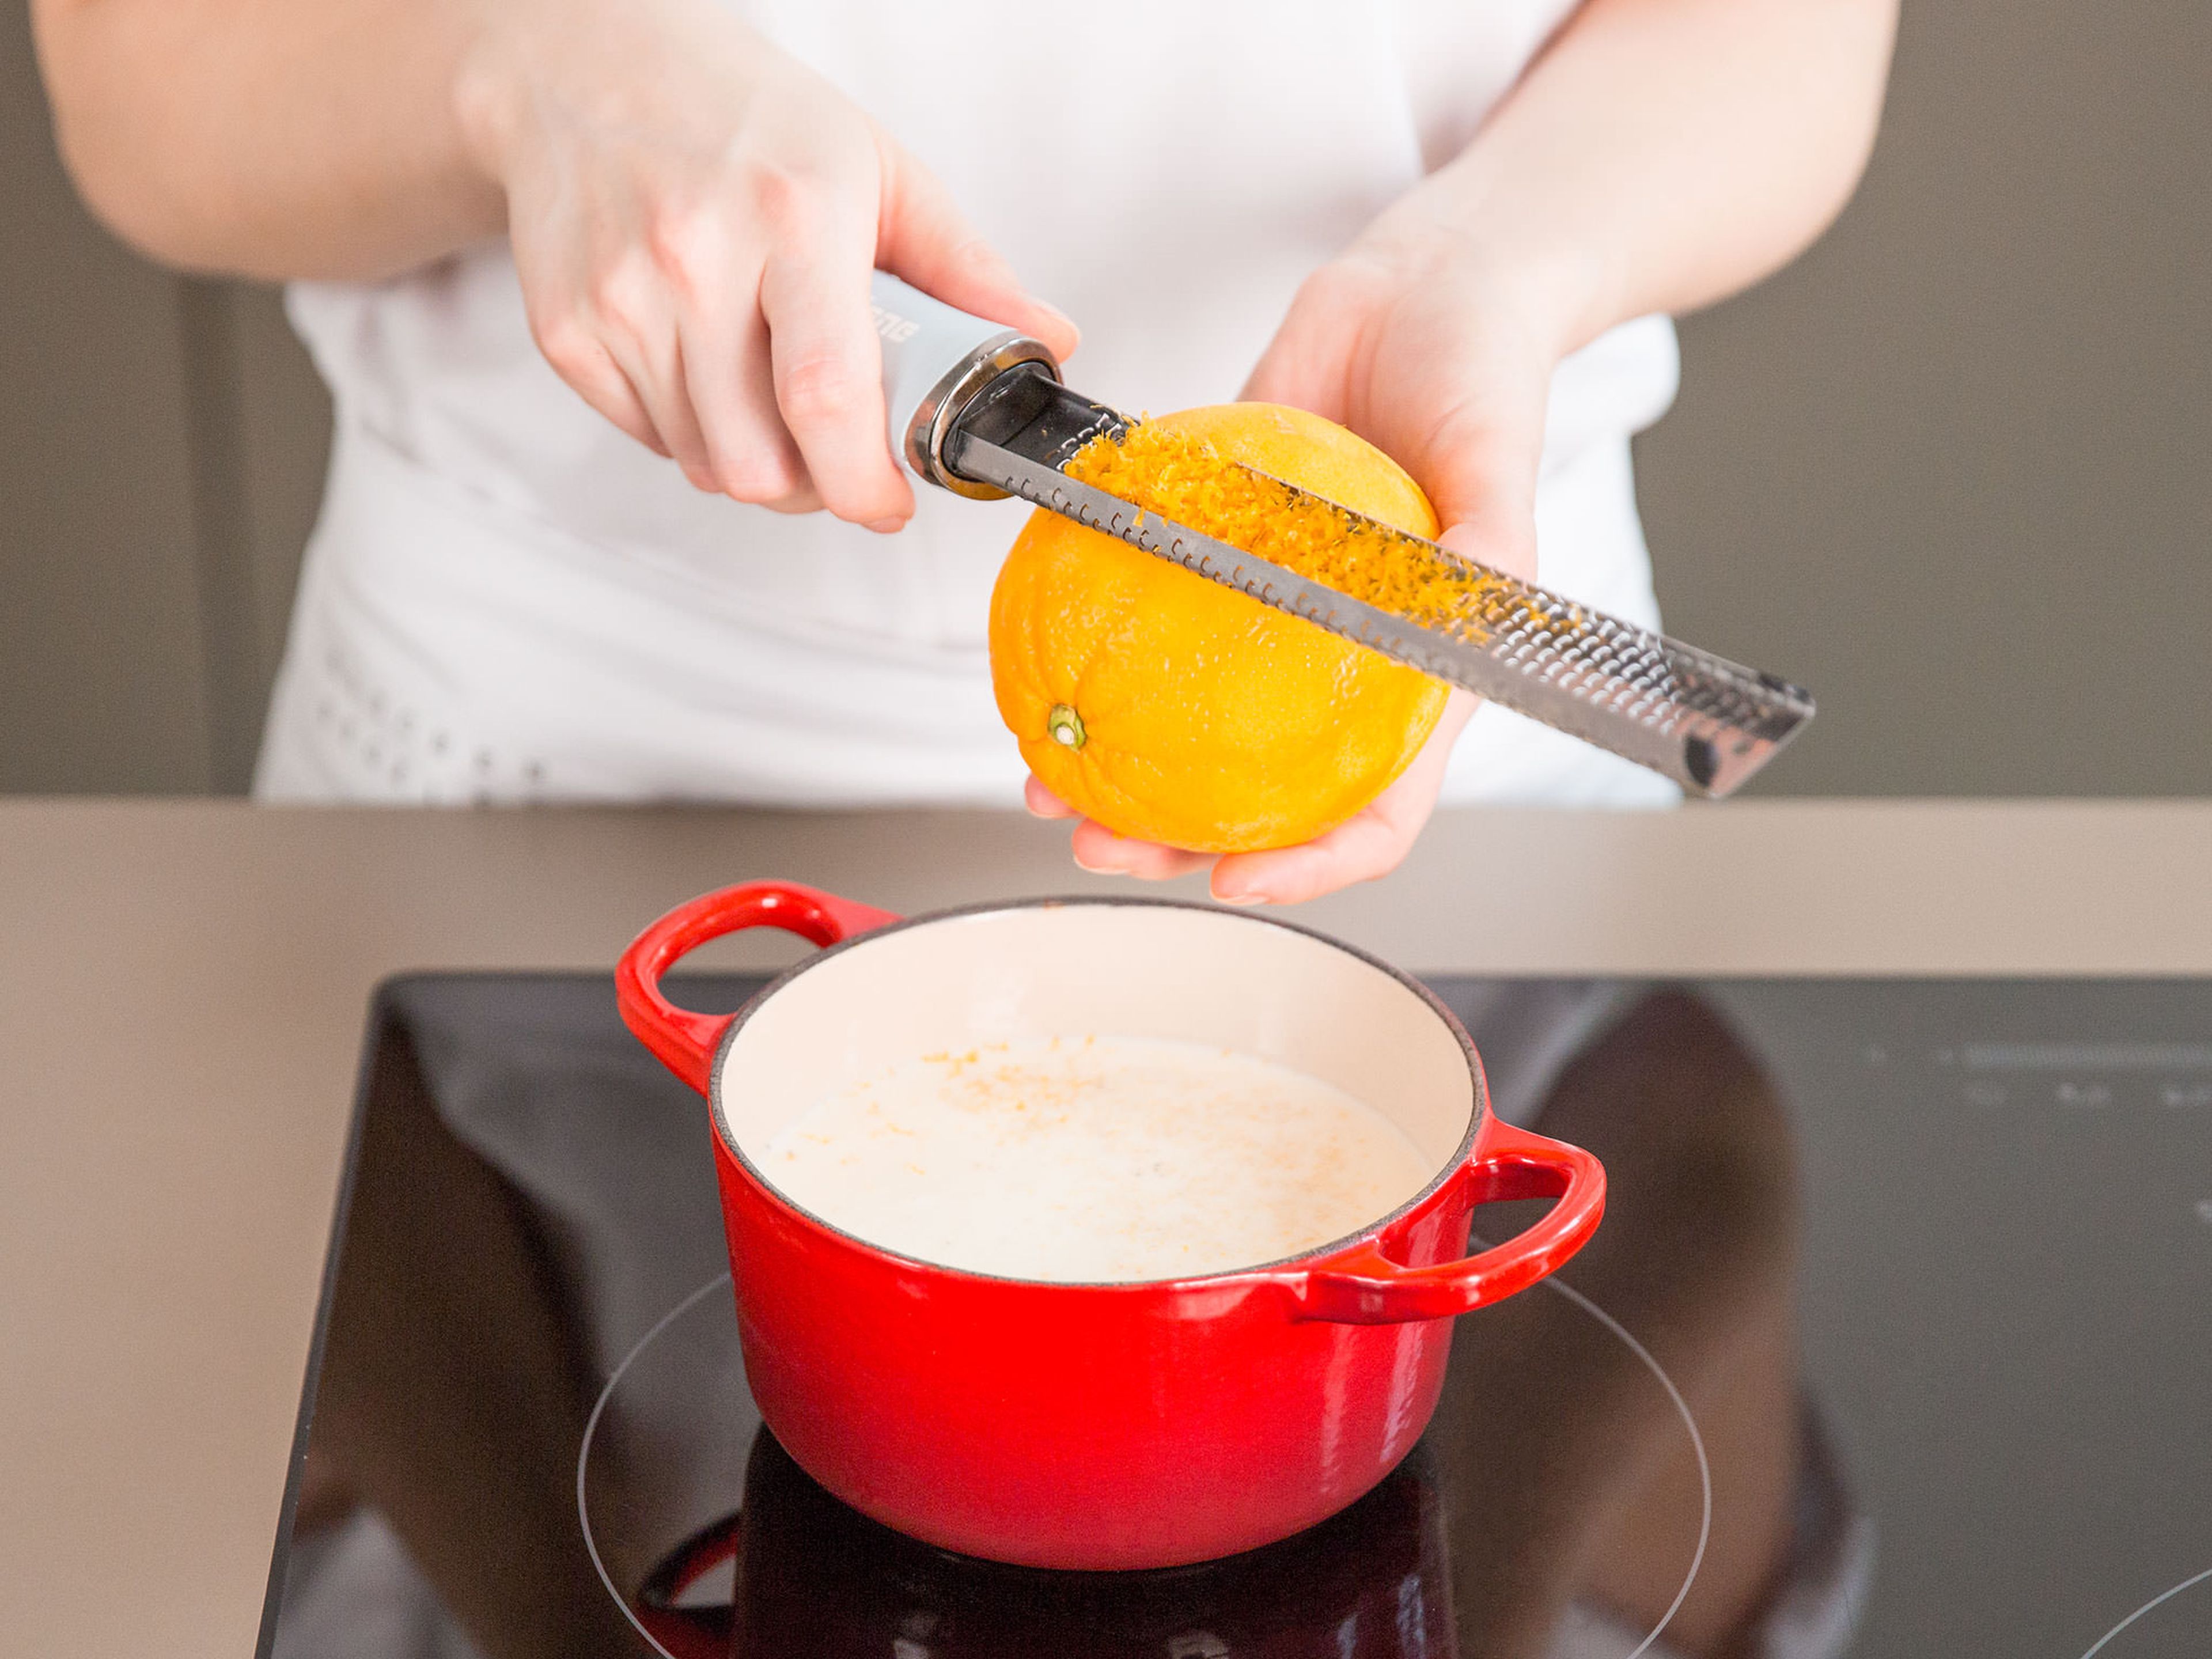 Add the remaining cream, milk, vanilla bean seeds, and orange zest to a small saucepan. Bring to a boil over medium-low heat and then leave it to cool for approx. 5 – 10 min.